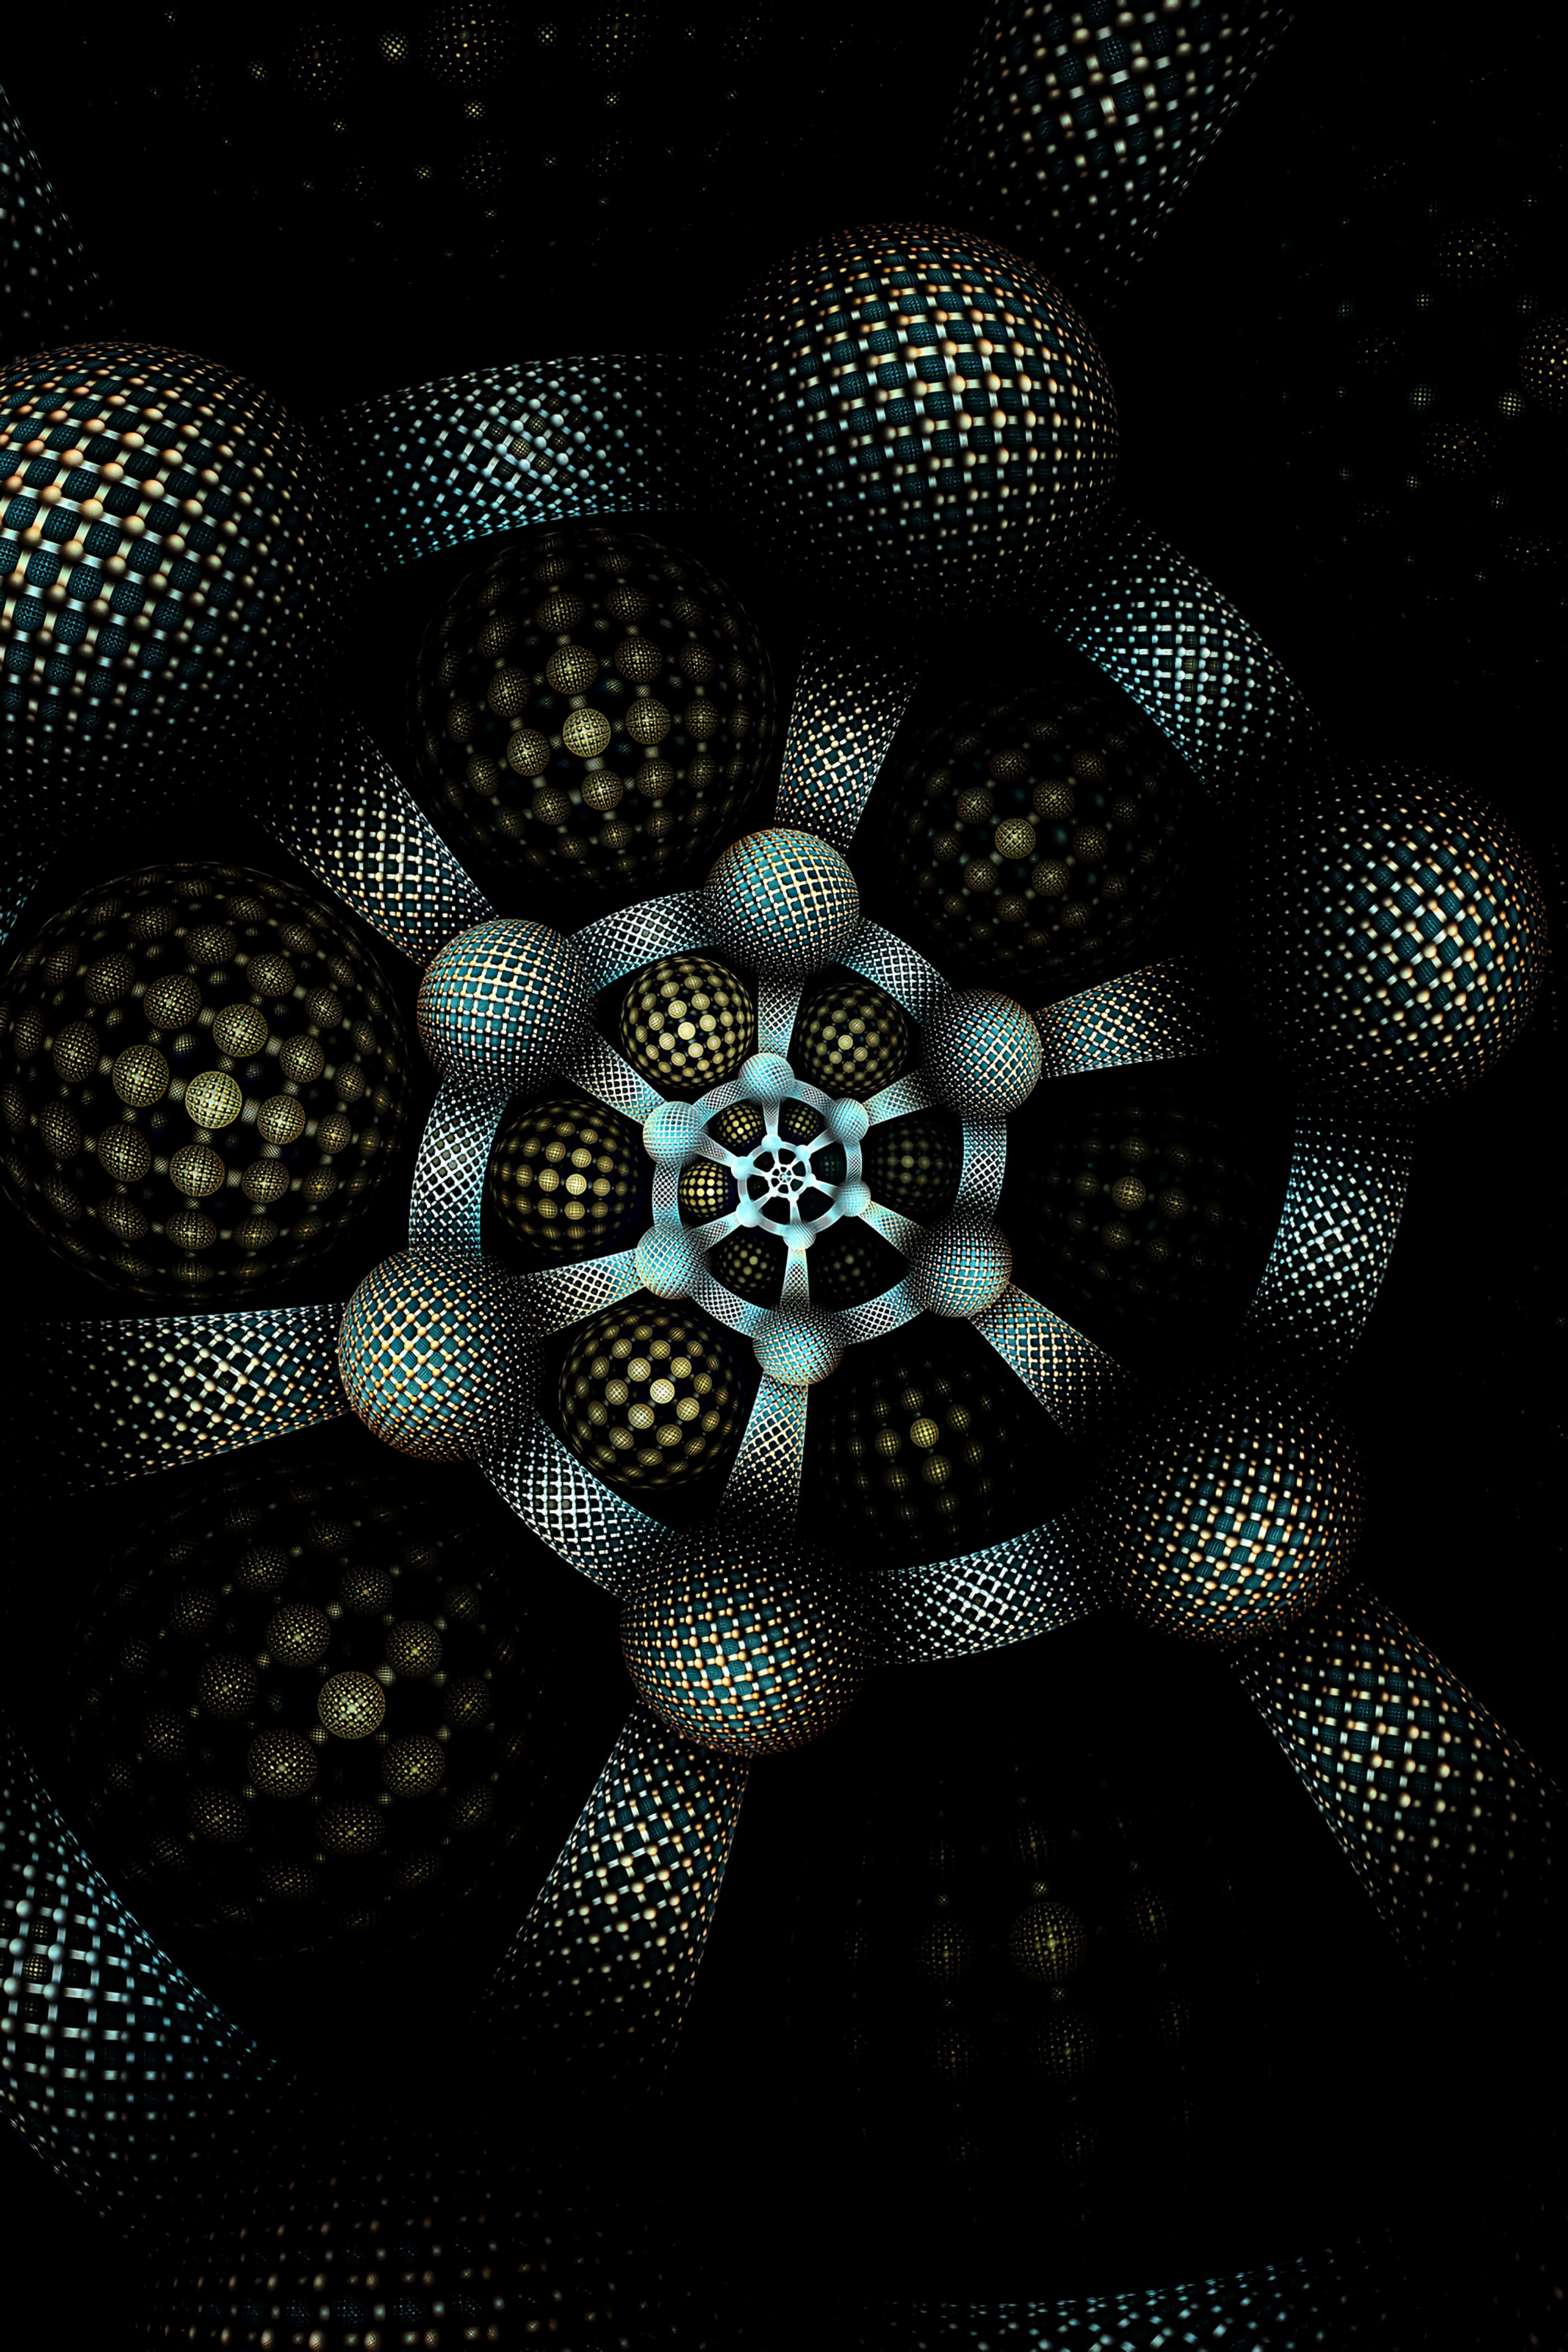 dark, form, circles, involute, abstract, pattern, fractal, swirling cellphone